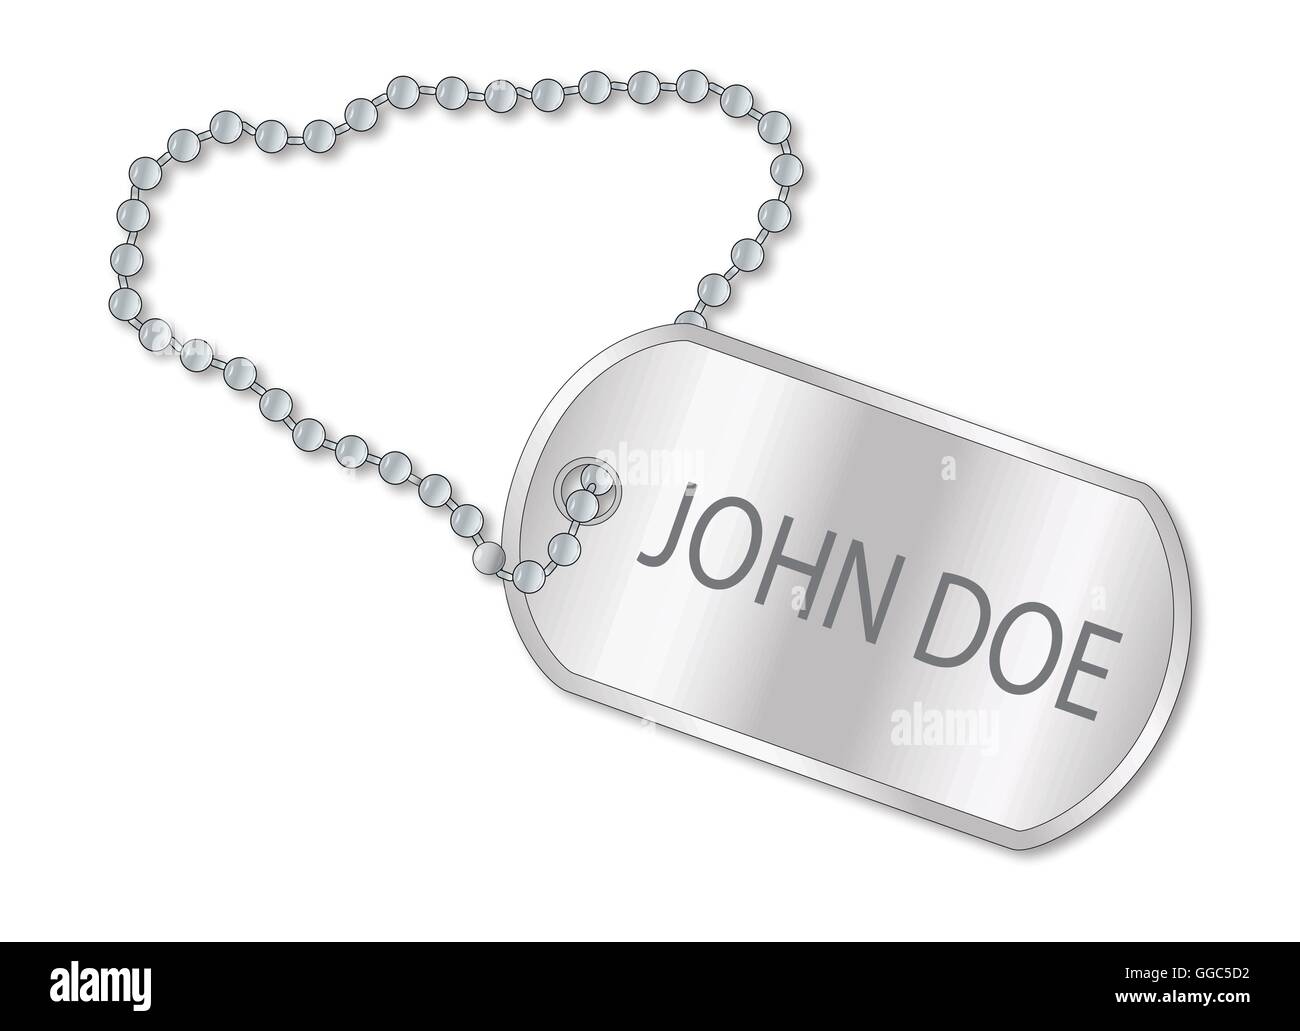 A military style dog tags with chain with the text John Doe Stock Vector